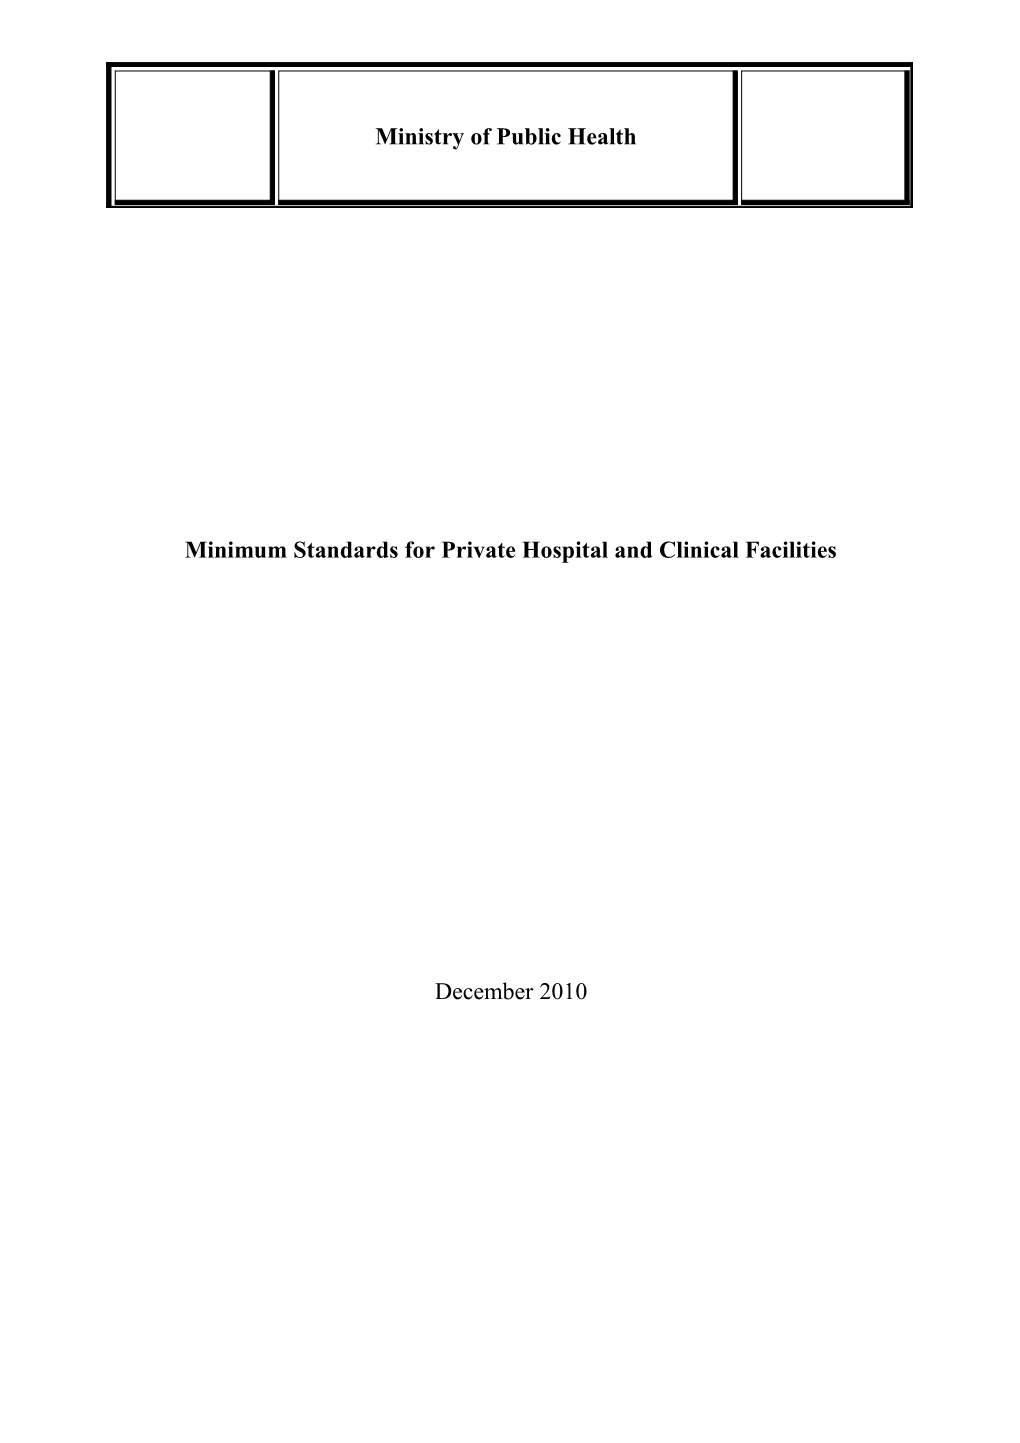 Minimum Standards for Private Hospital and Clinical Facilities